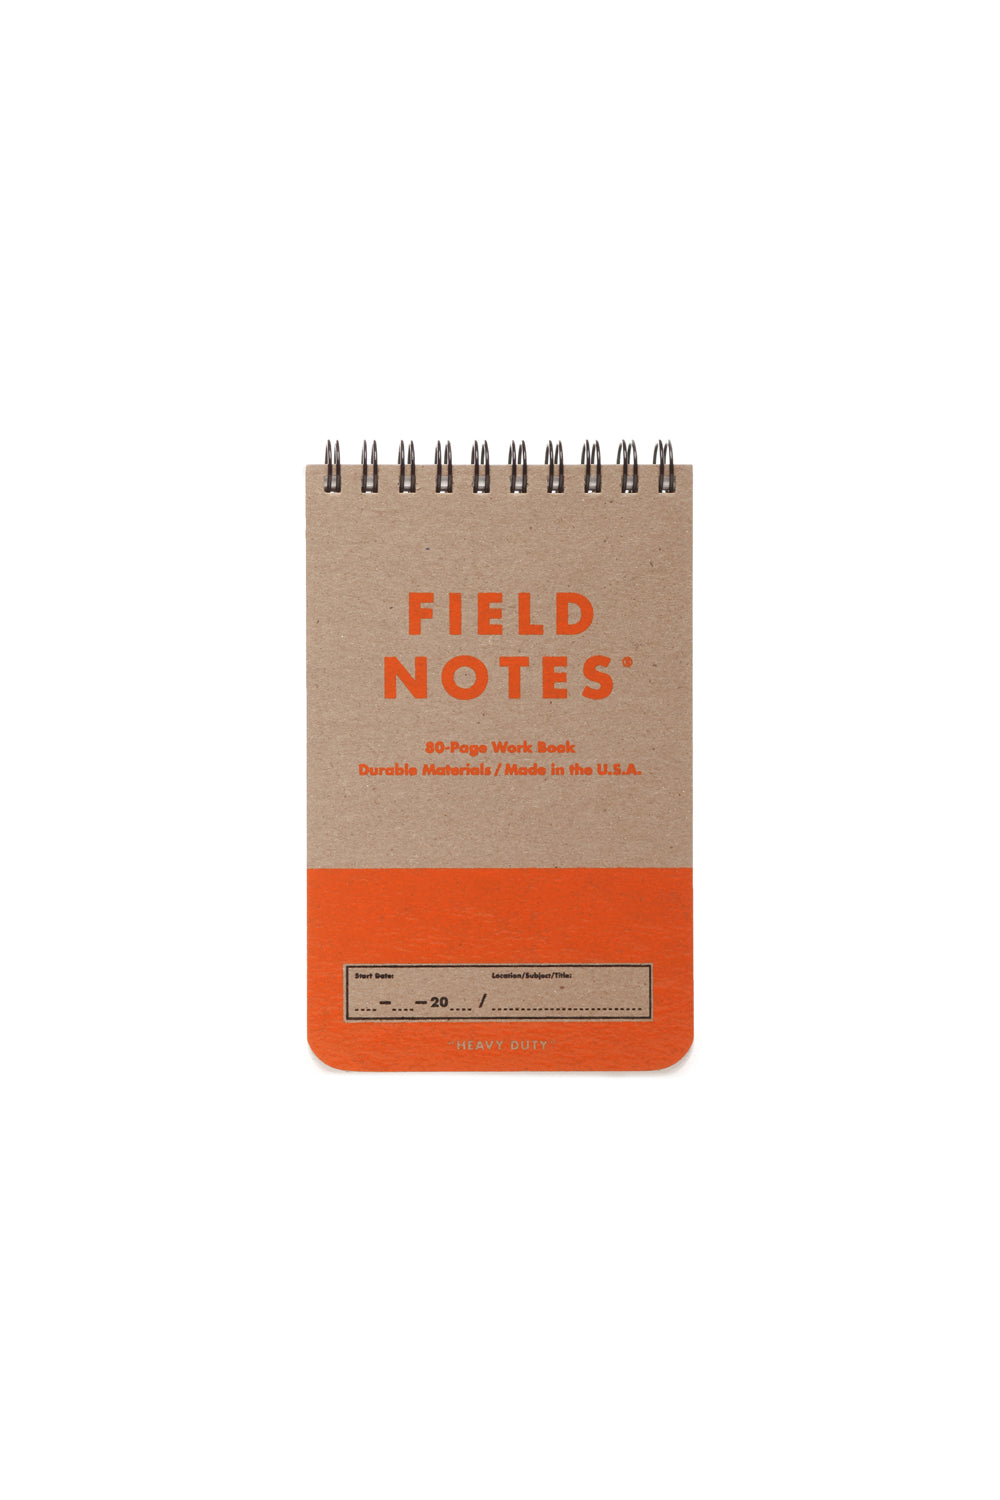 Field Notes Heavy Duty Edition 2-Pack